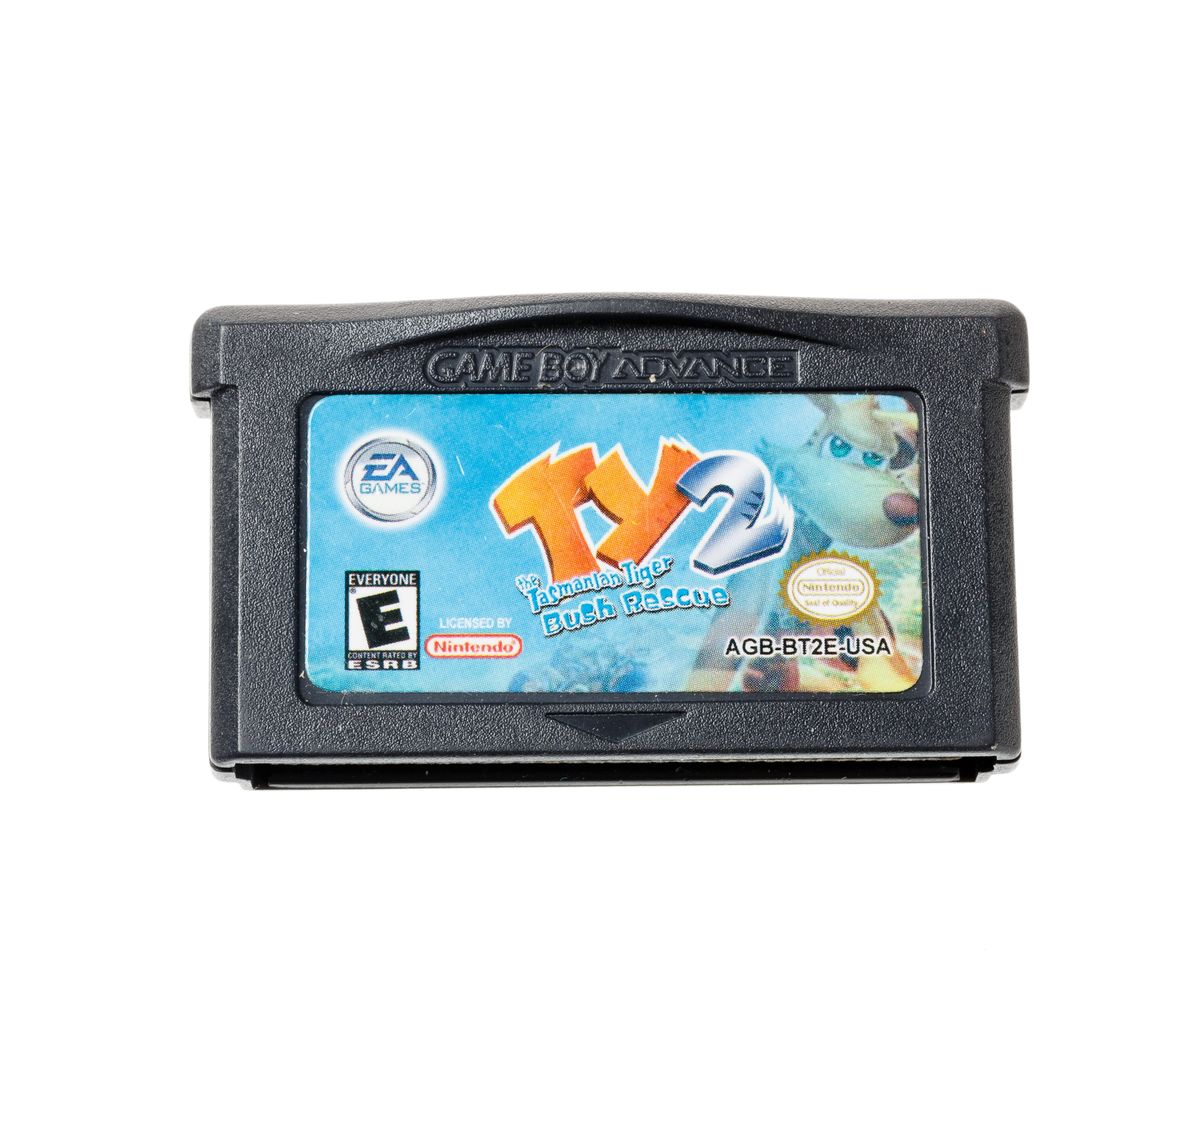 TY 2 The Tasmanian Tiger - Gameboy Advance Games